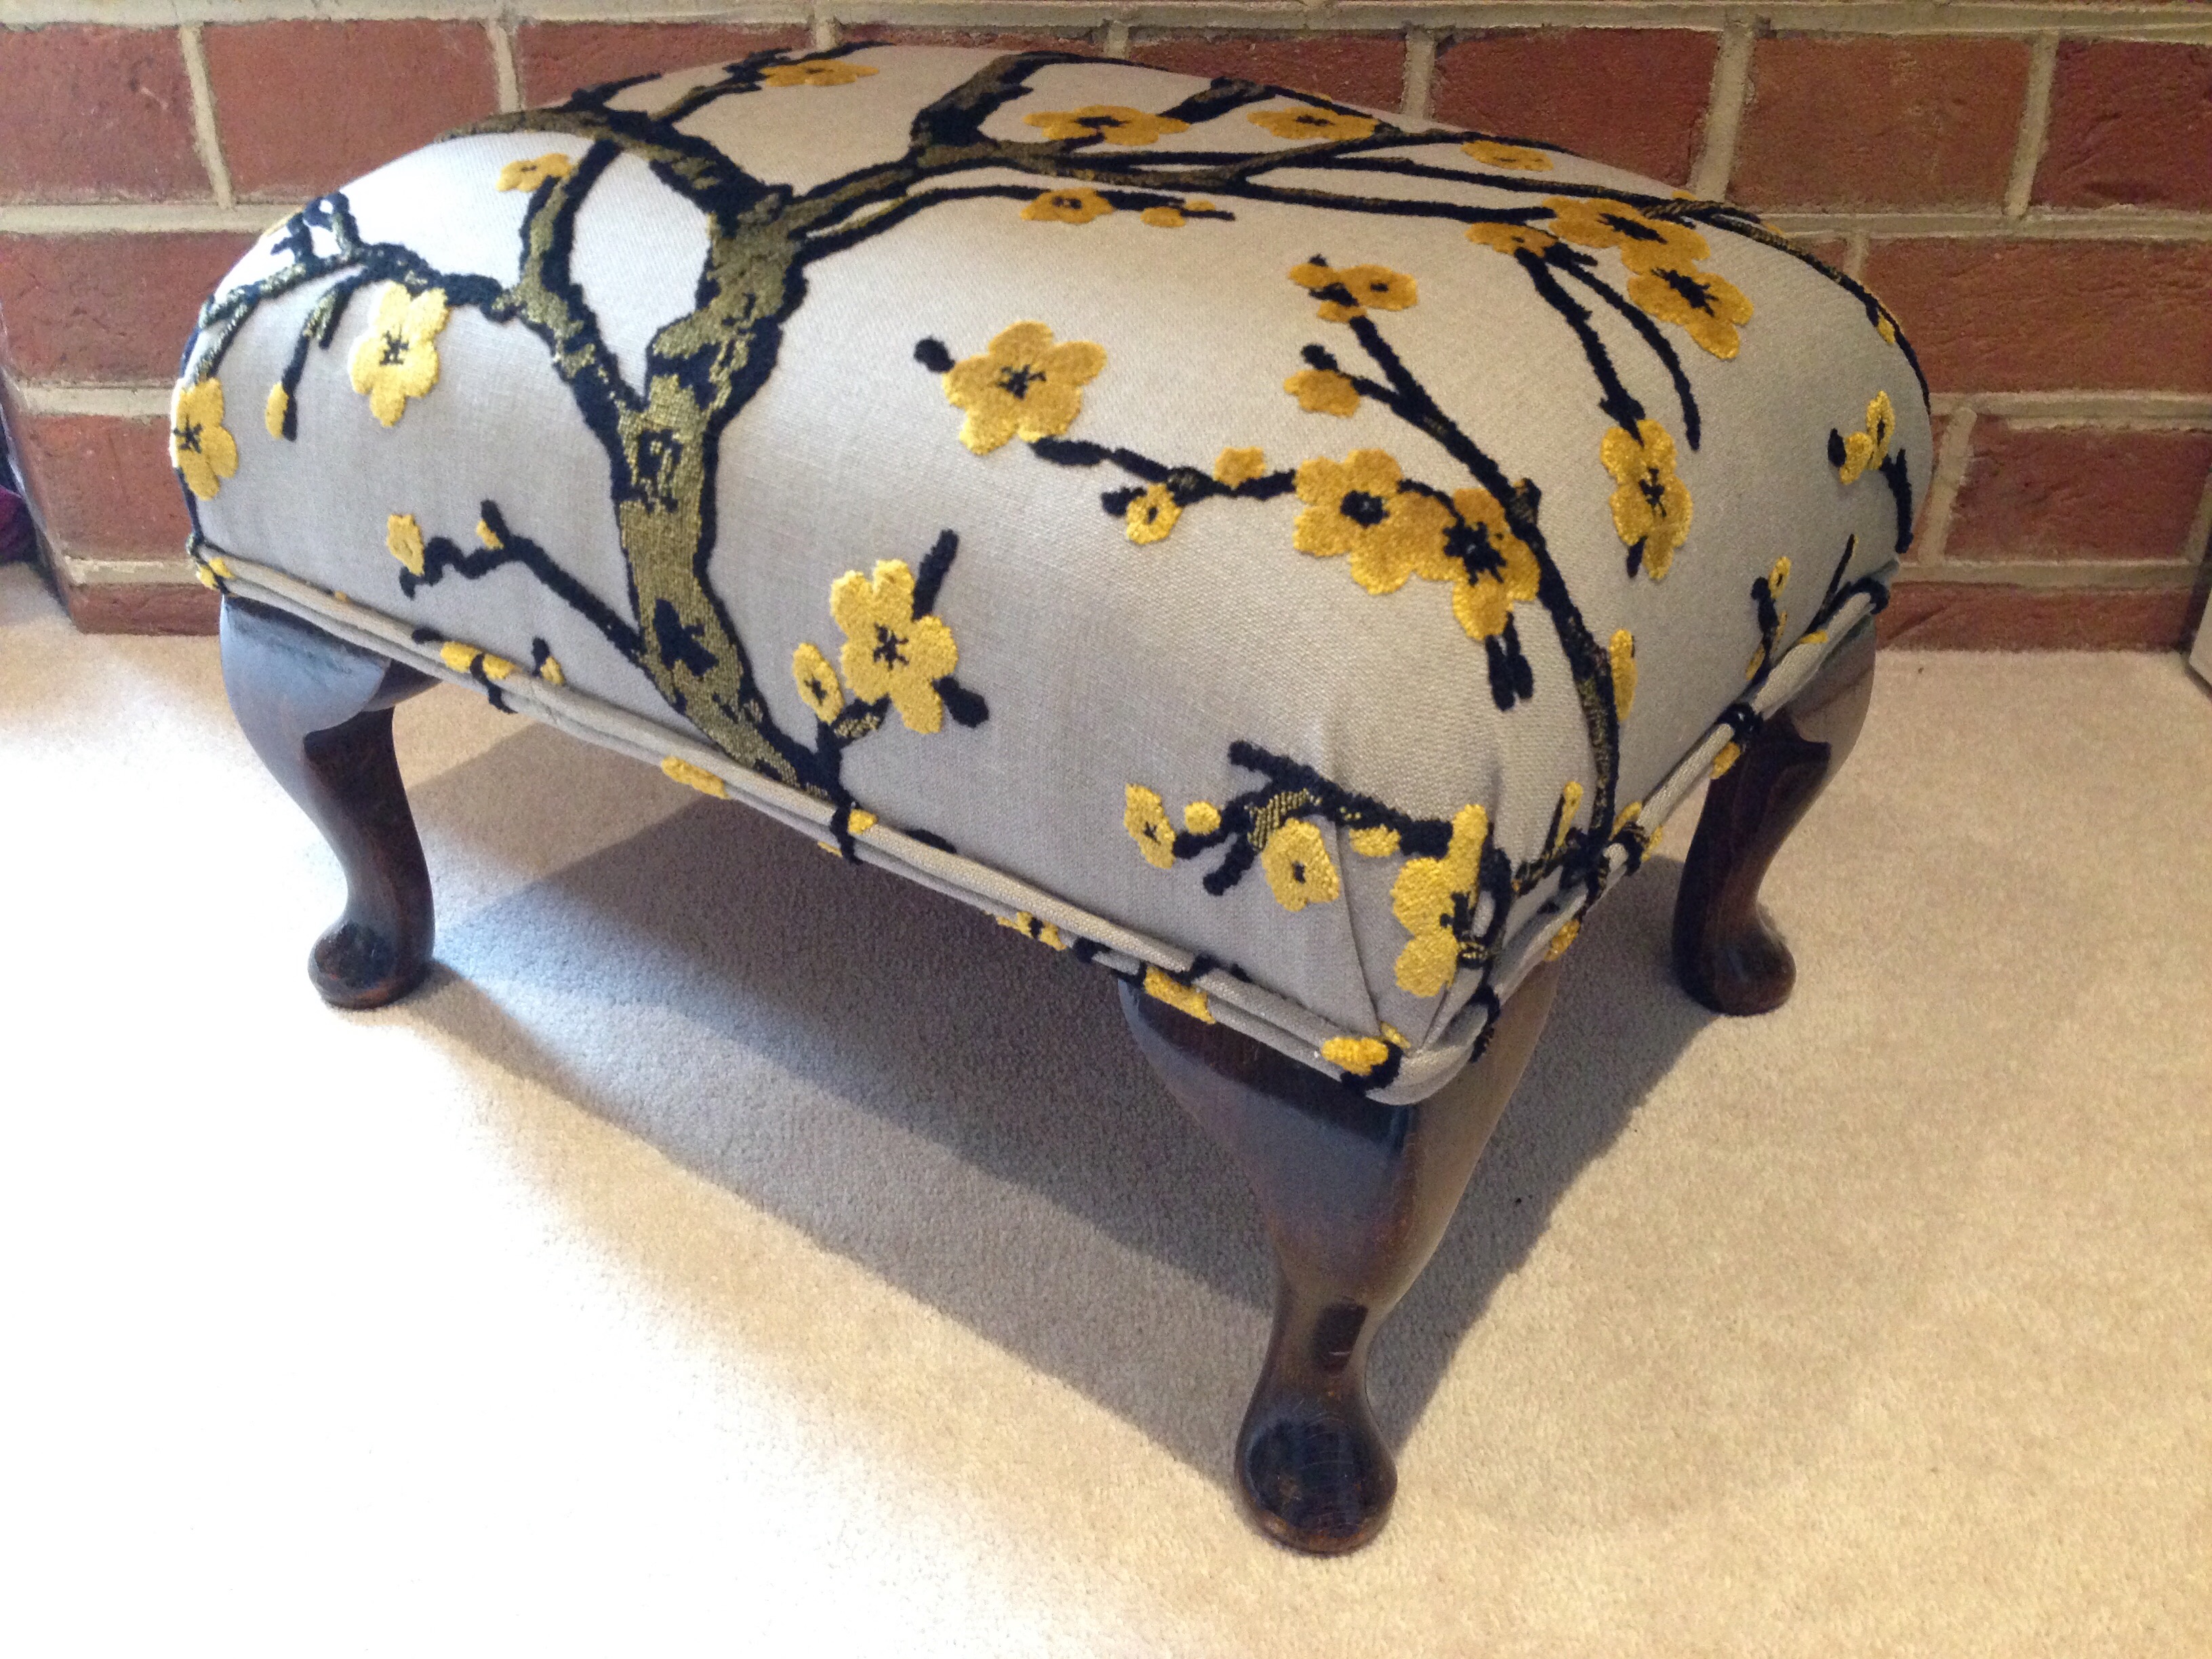 Footstool in Blossom Fabric